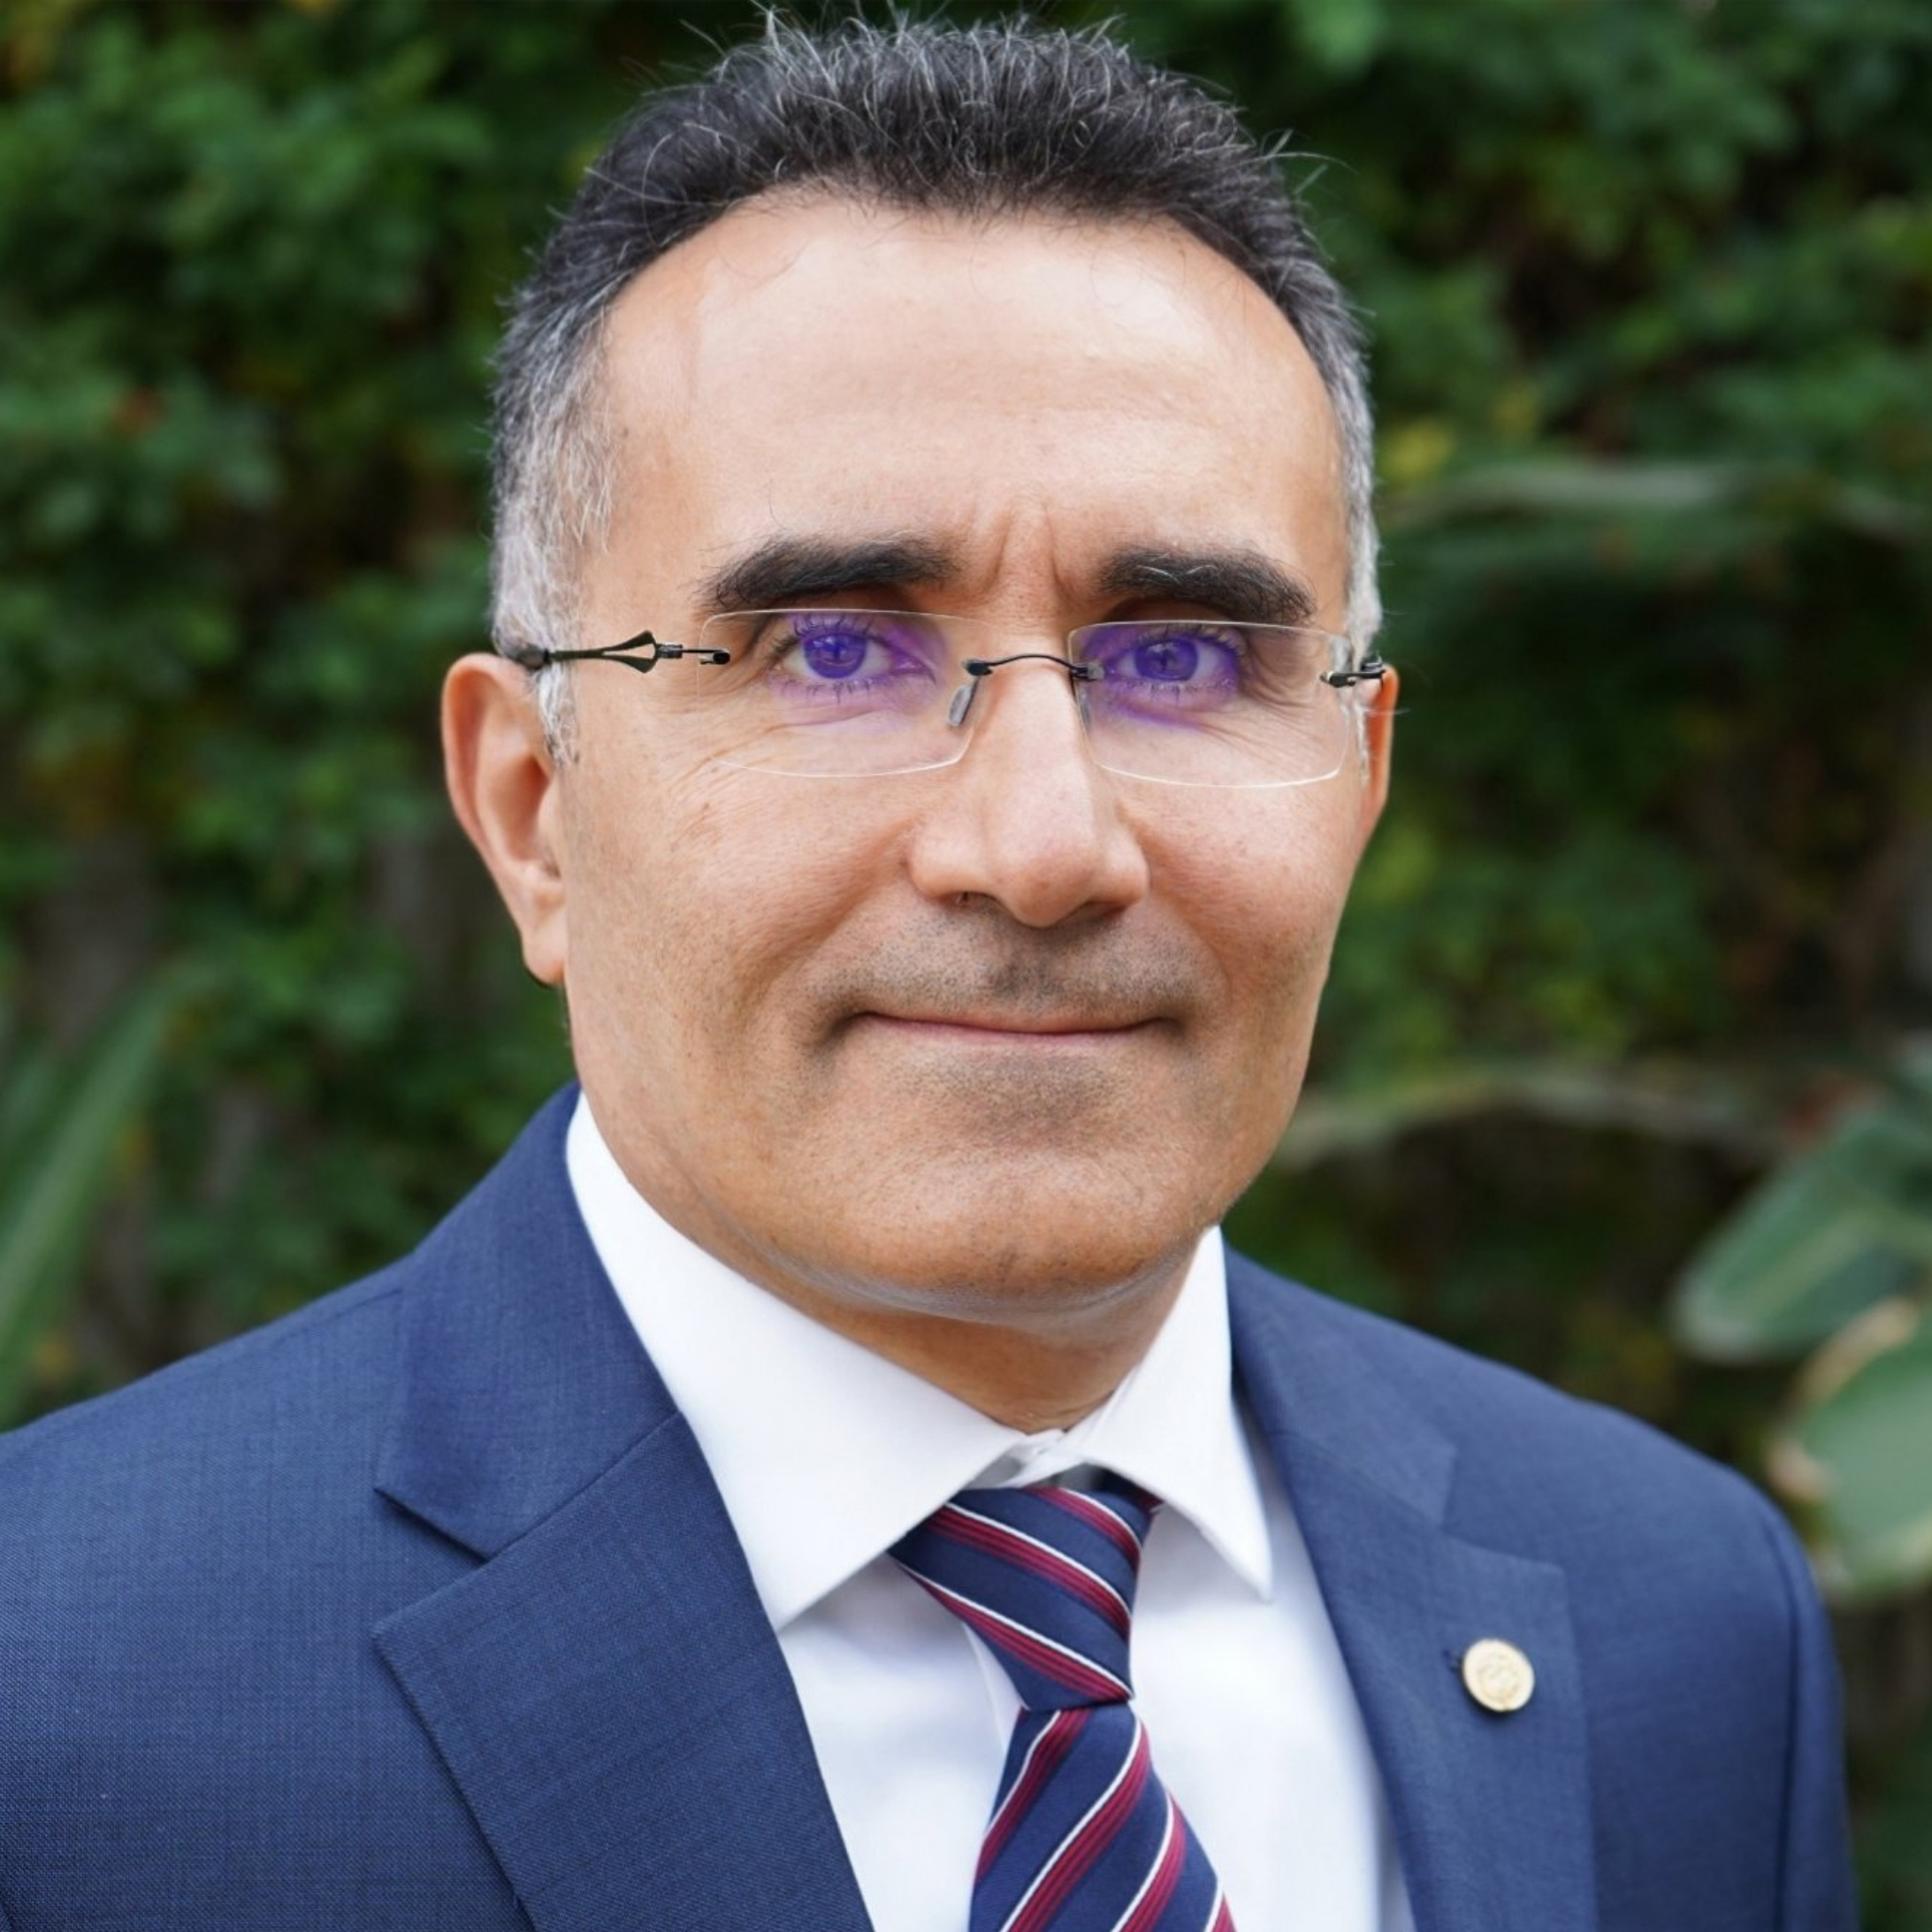 Photo of Dr Bilel JAMOUSSI, candidate